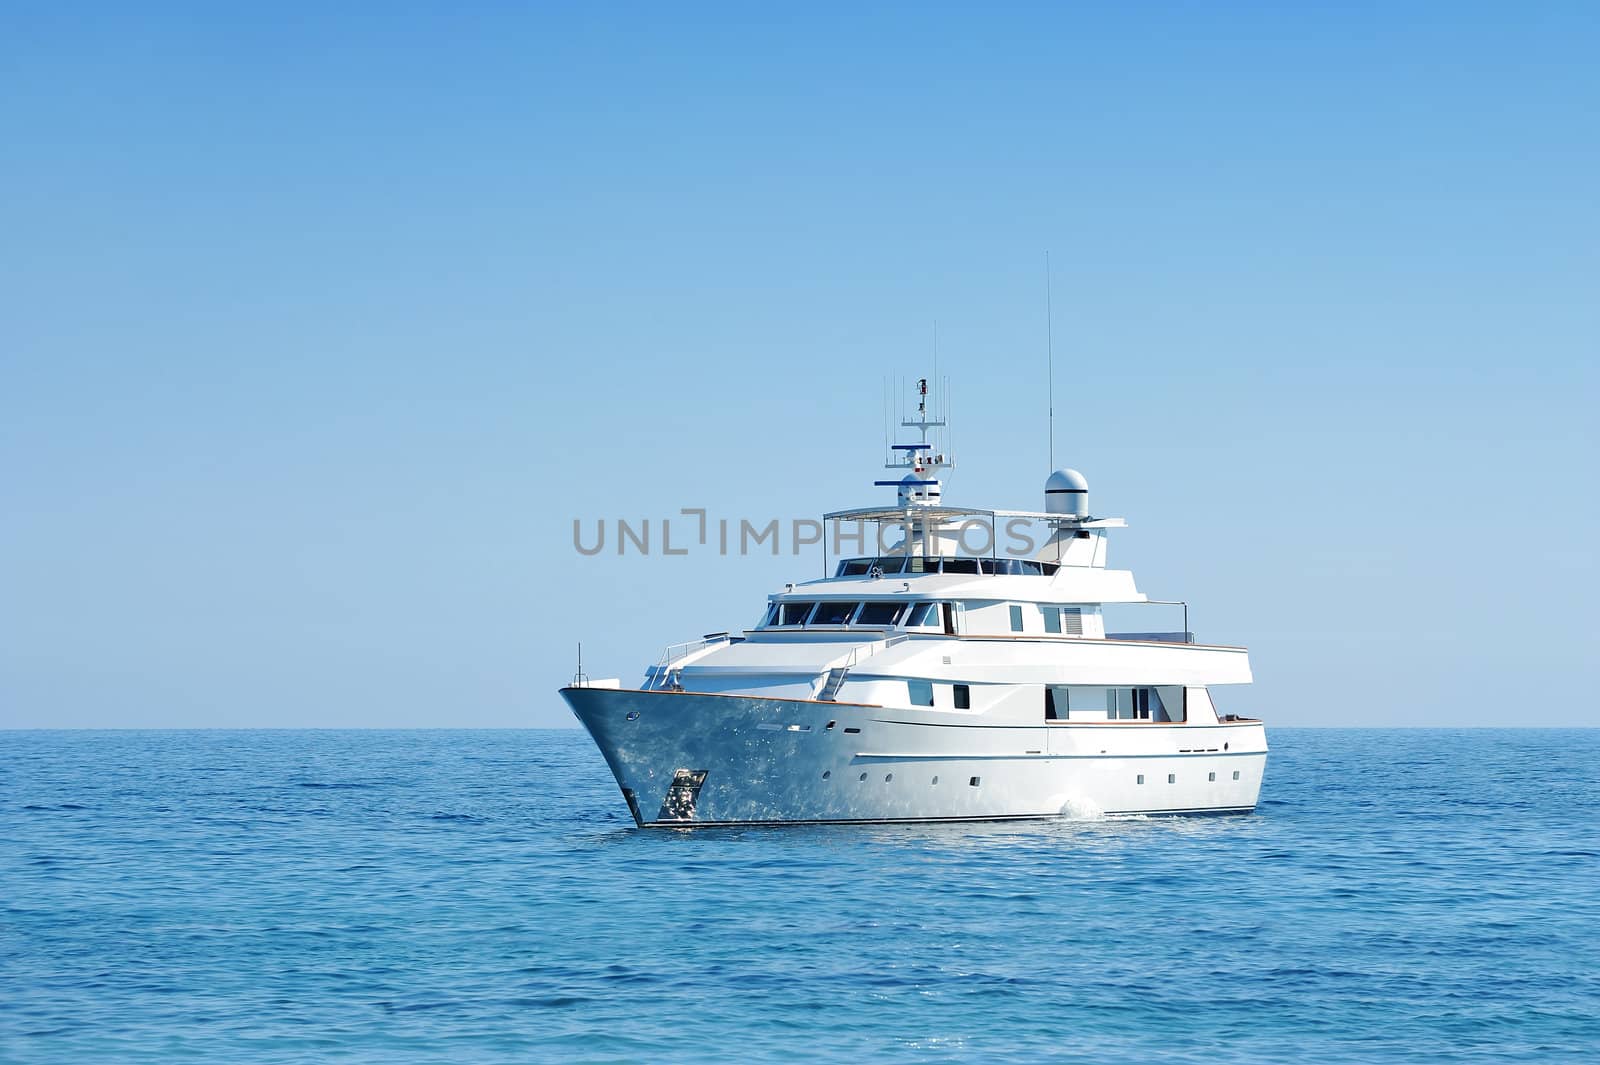 Side view of luxury motor yacht at open sea with copy space